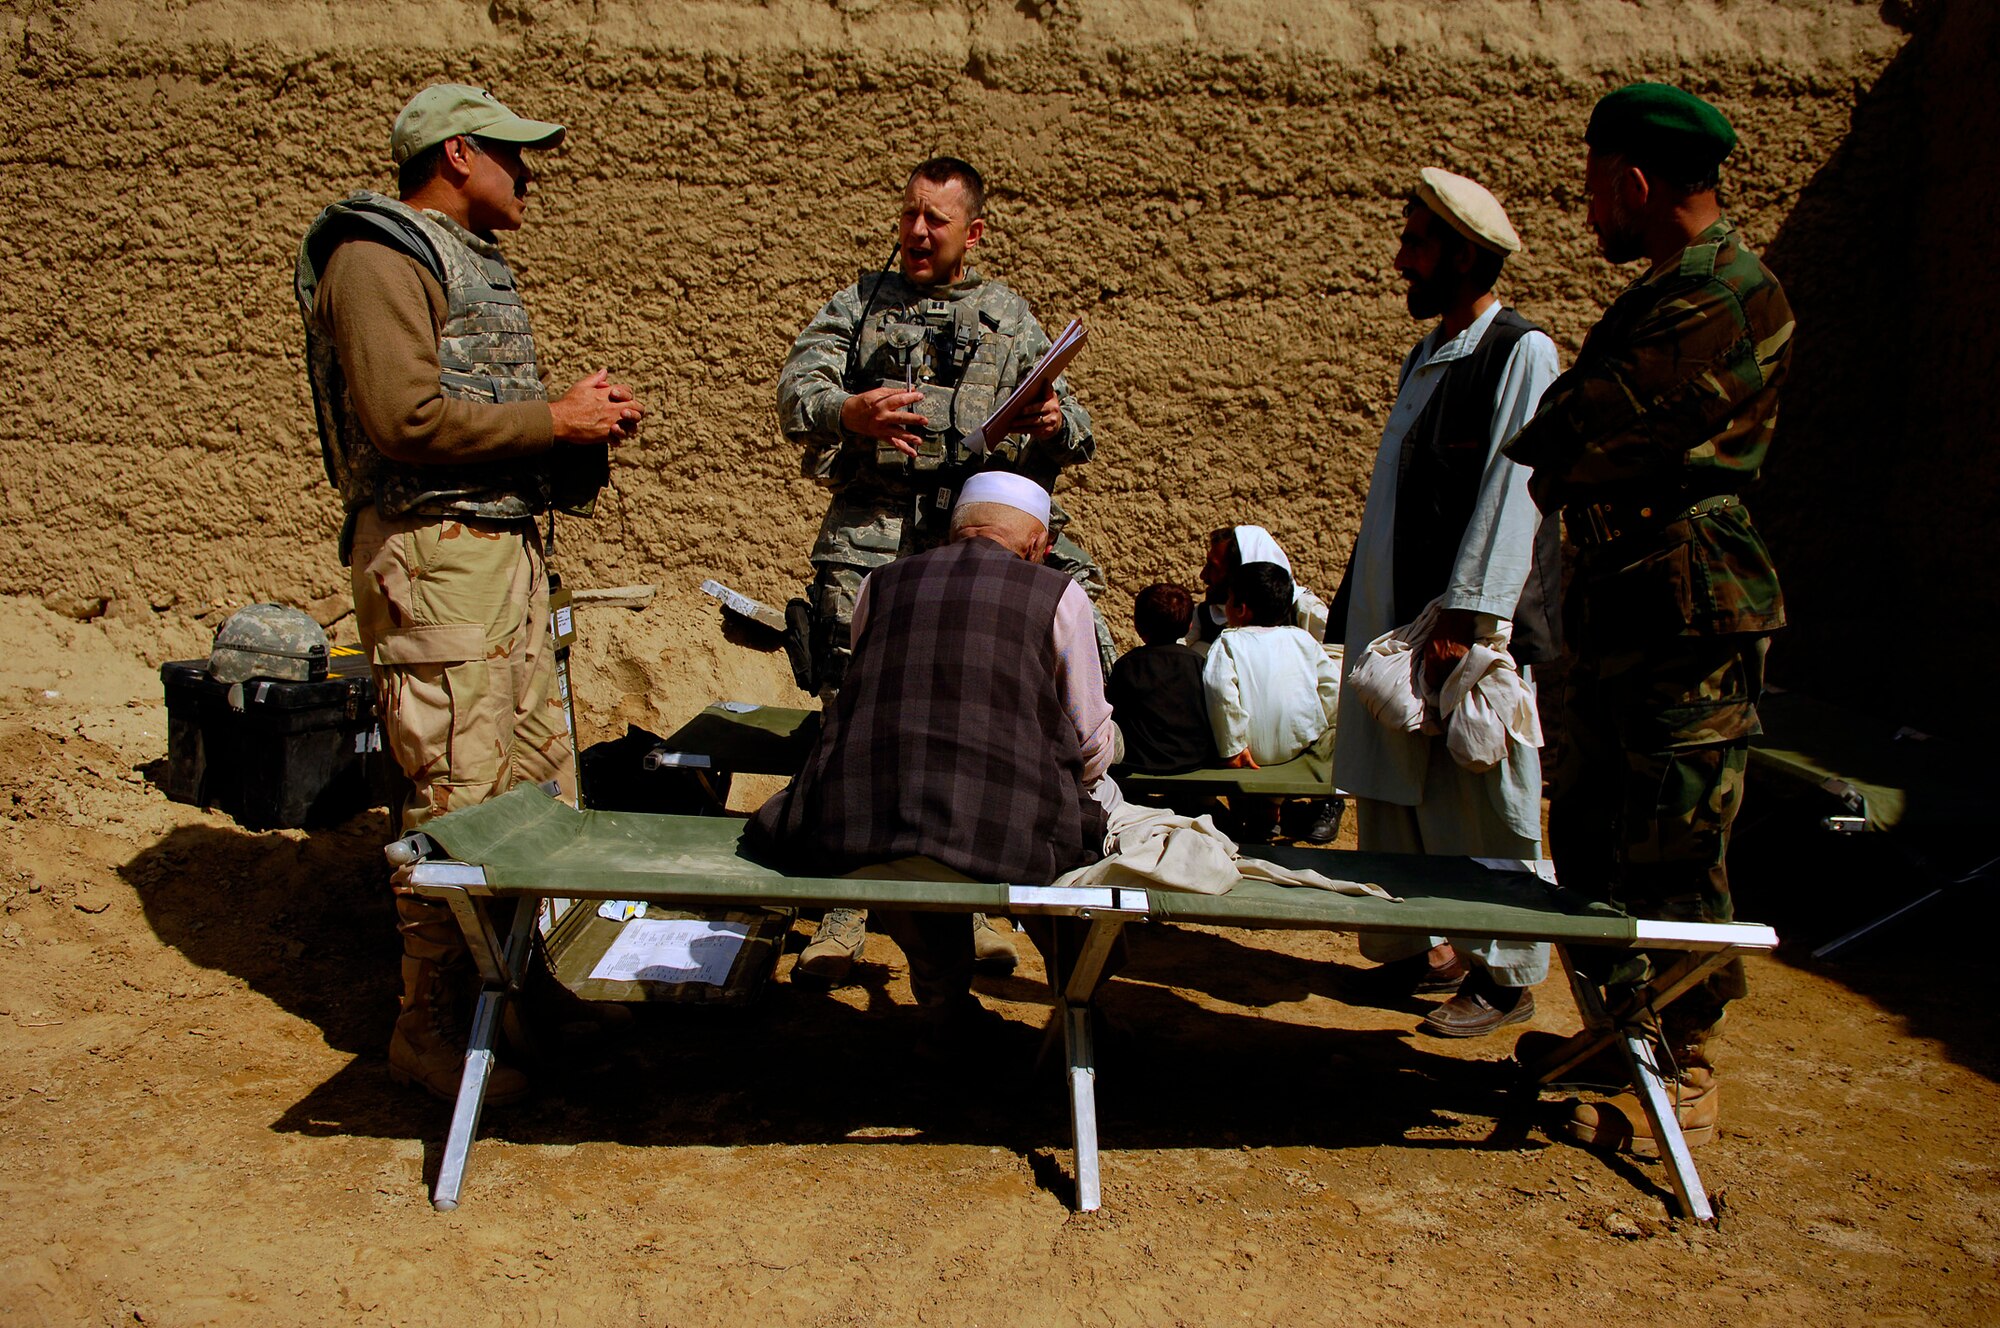 U.S. Air Force Capt. Marshall Fiscus talks with the interpreter about the patient?s condition April 19, 2008, during a Village Medical Outreach at the Joybar village conducted by the Provincial Reconstruction Team, Bagram Air Field Afghanistan. Fiscus is the Chief Medical Officer assigned to the PRT and is deployed from Geilenkirchen, Germany. (U.S. Air Force photo by Master Sgt. Andy Dunaway) (Released)
